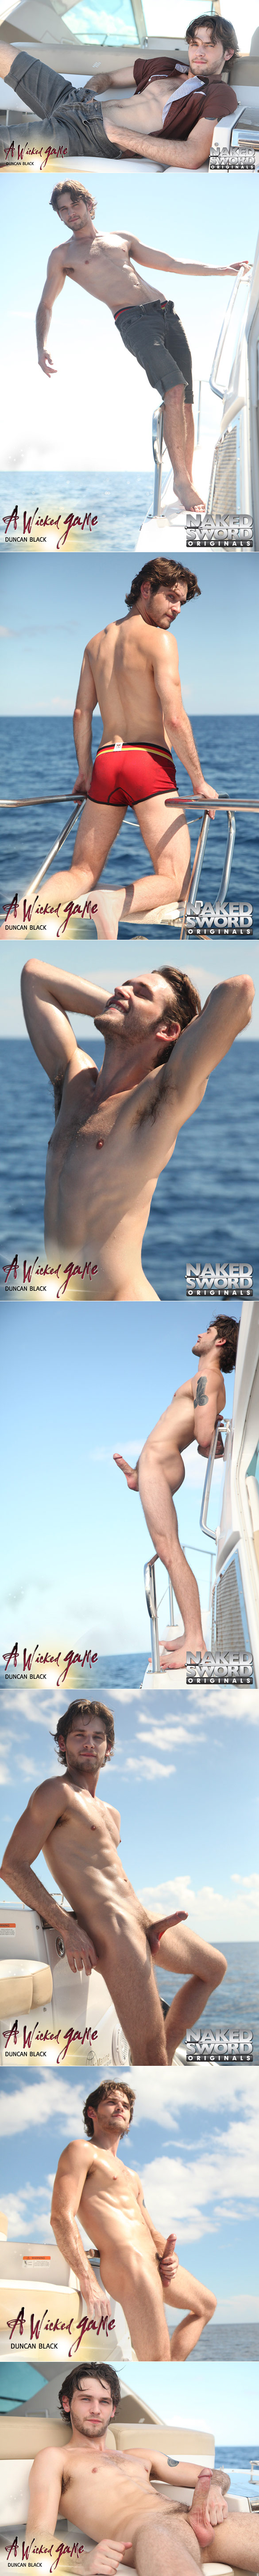 NakedSword Originals: Ryan Rose pounds Duncan Black in “A Wicked Game, Episode 2: Stormy Seas”